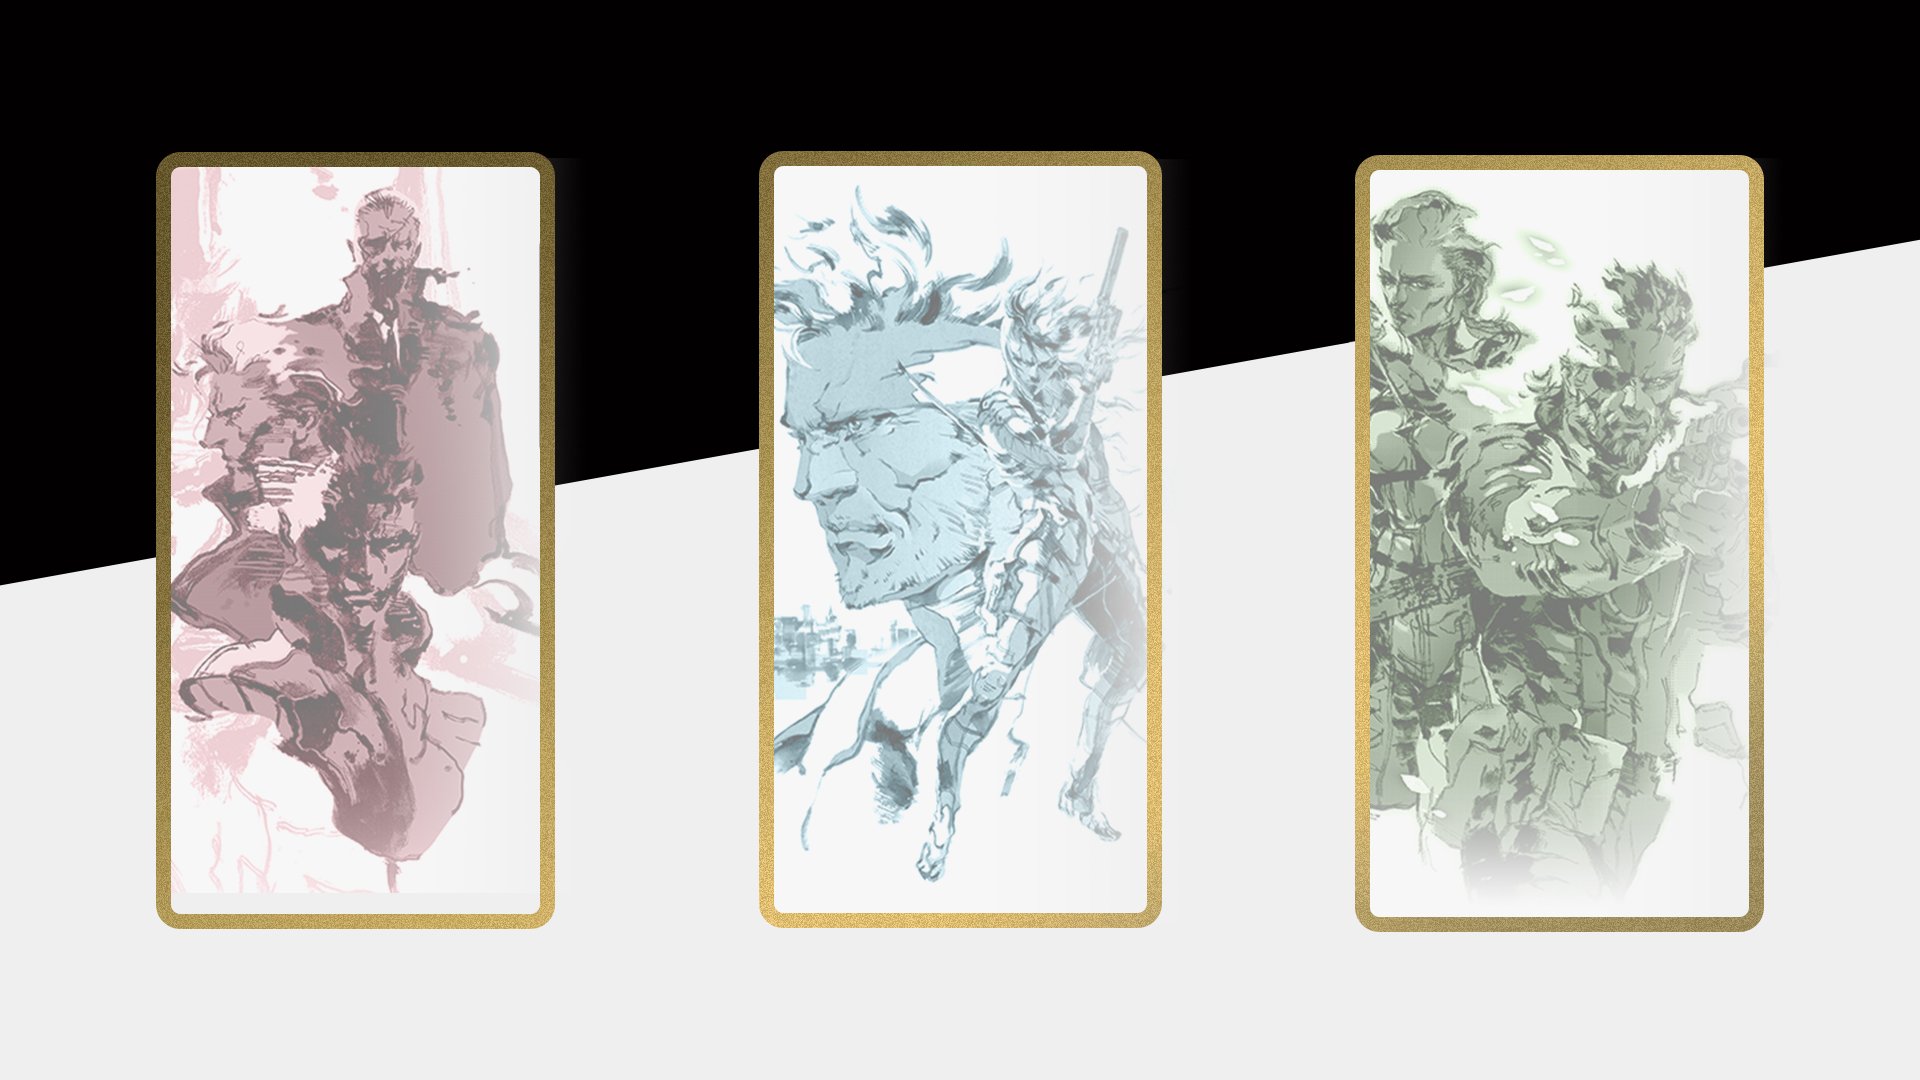 METAL GEAR OFFICIAL on X: METAL GEAR SOLID: MASTER COLLECTION Vol